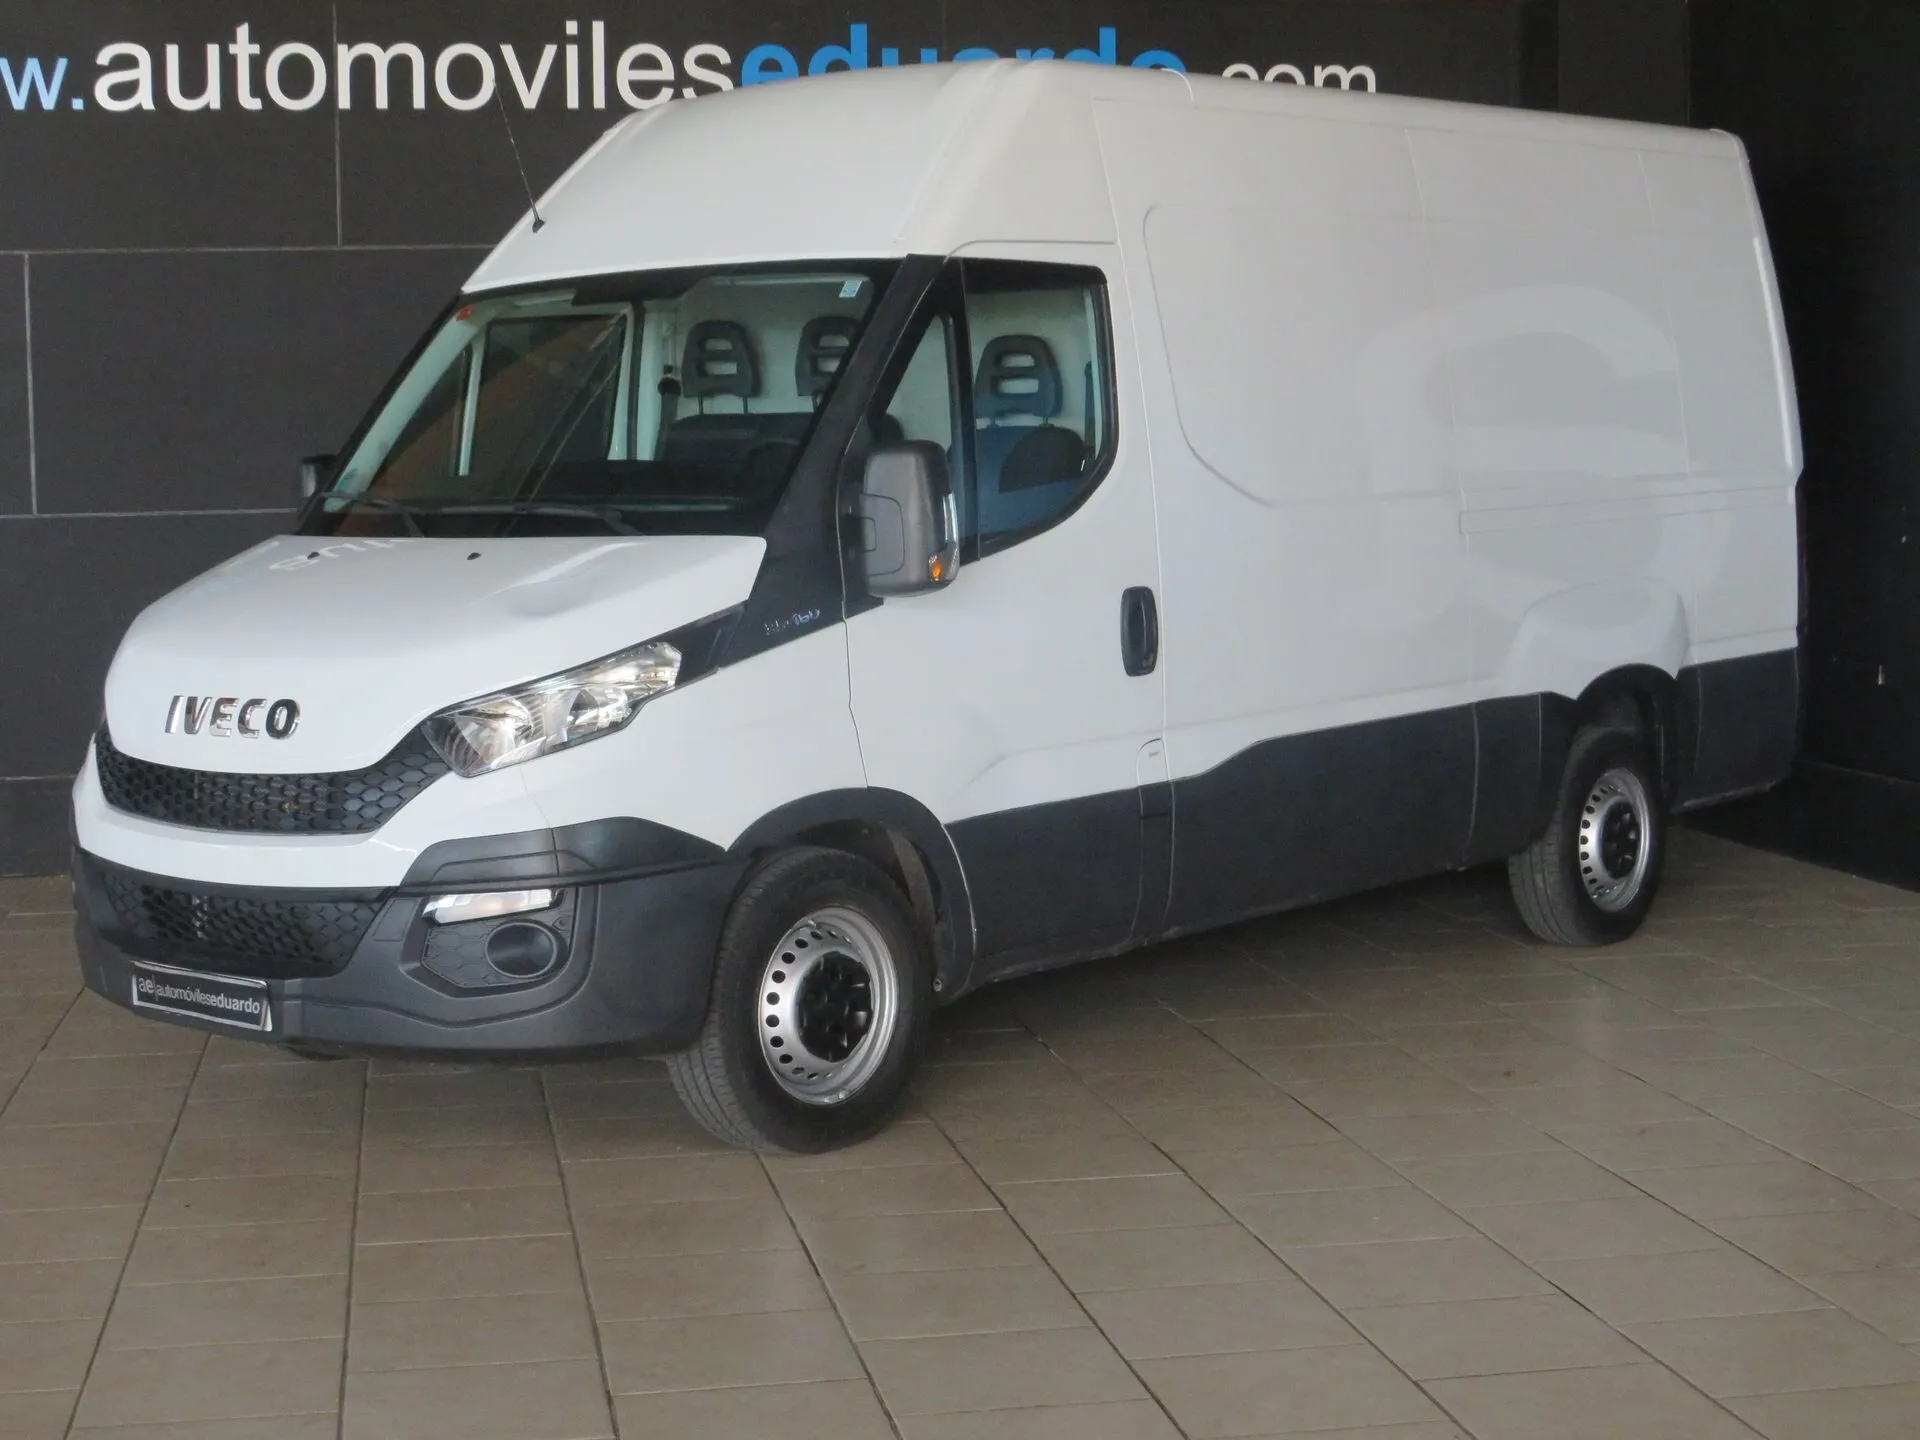  Renting IVECO Daily Family 35C15/2.3 SV 3520 H2 Tor 10.8 146